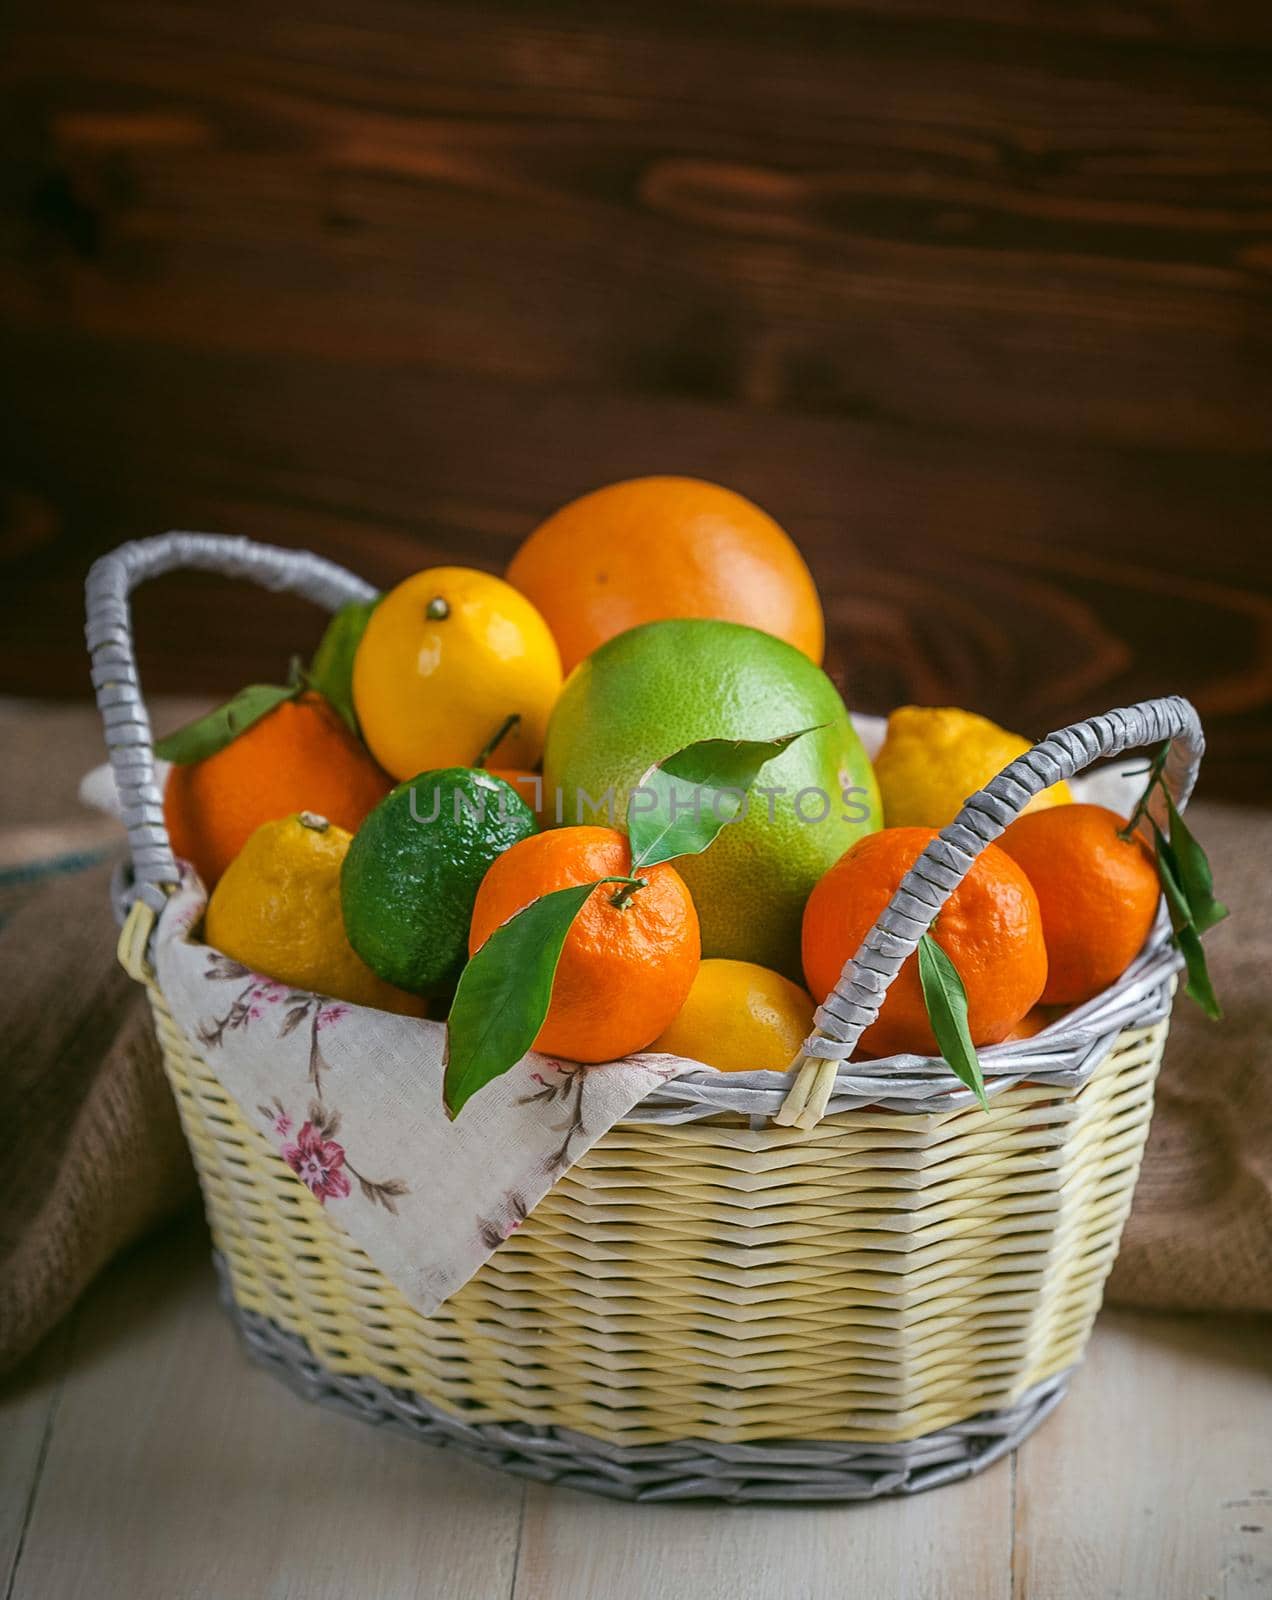 citrus fruits in a wicker basket on a wooden background